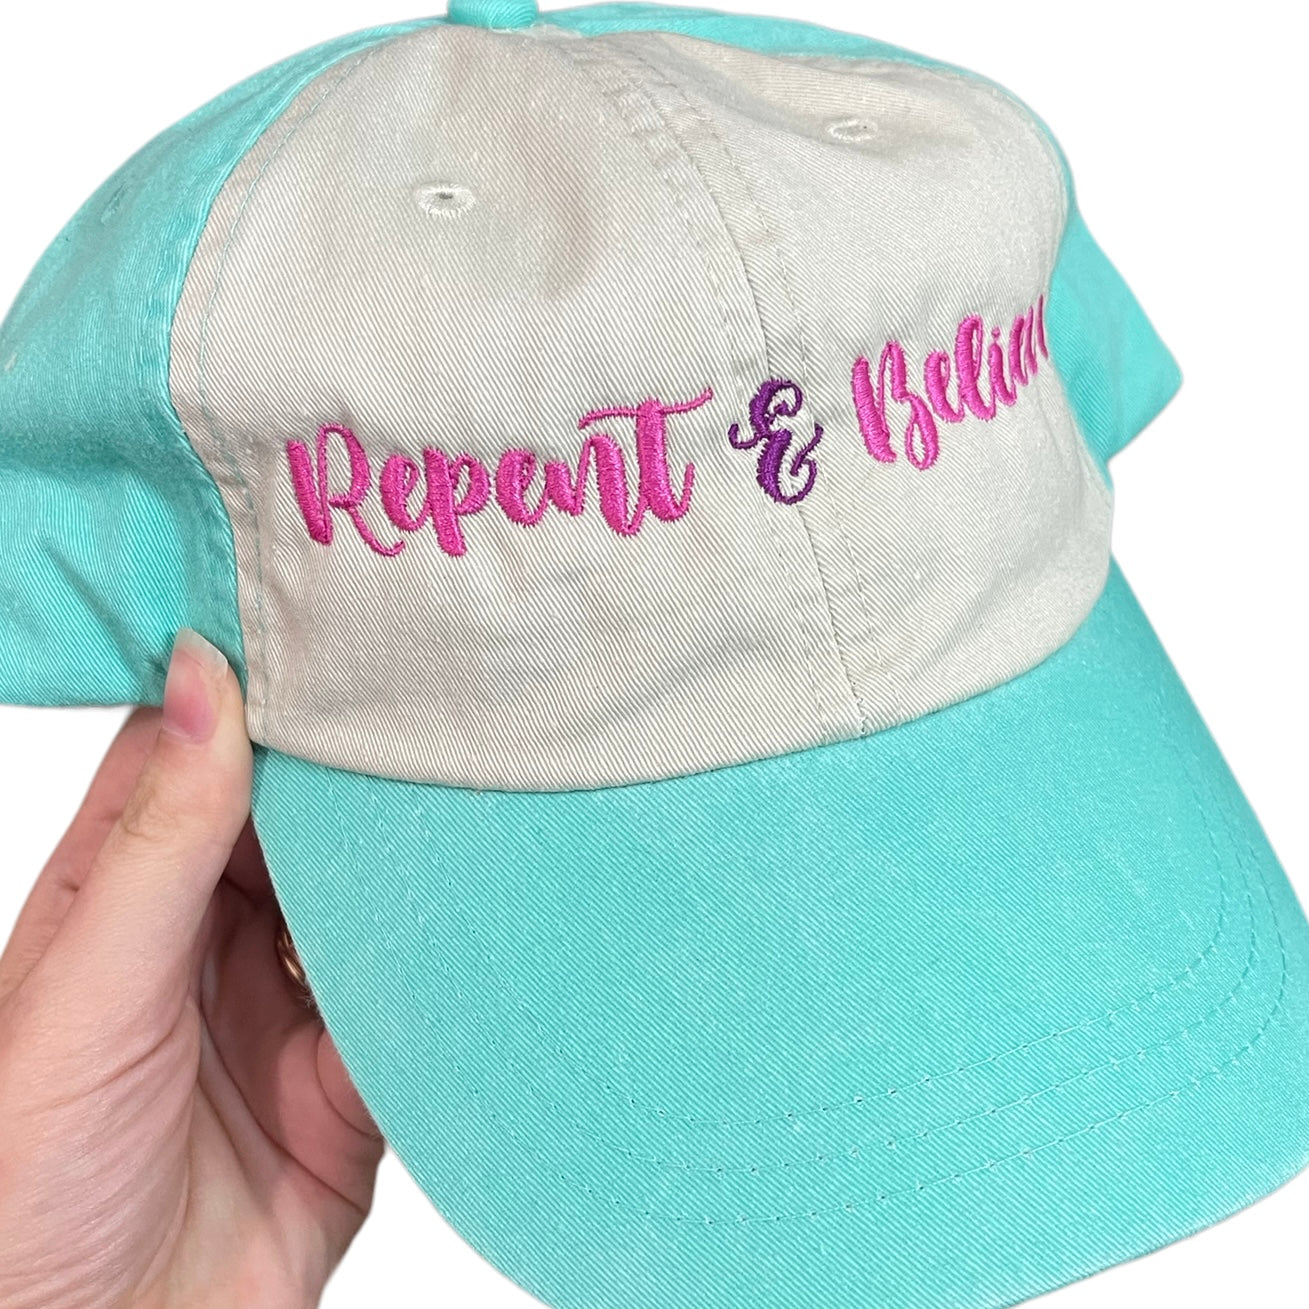 repent & believe | hat | teal + pink